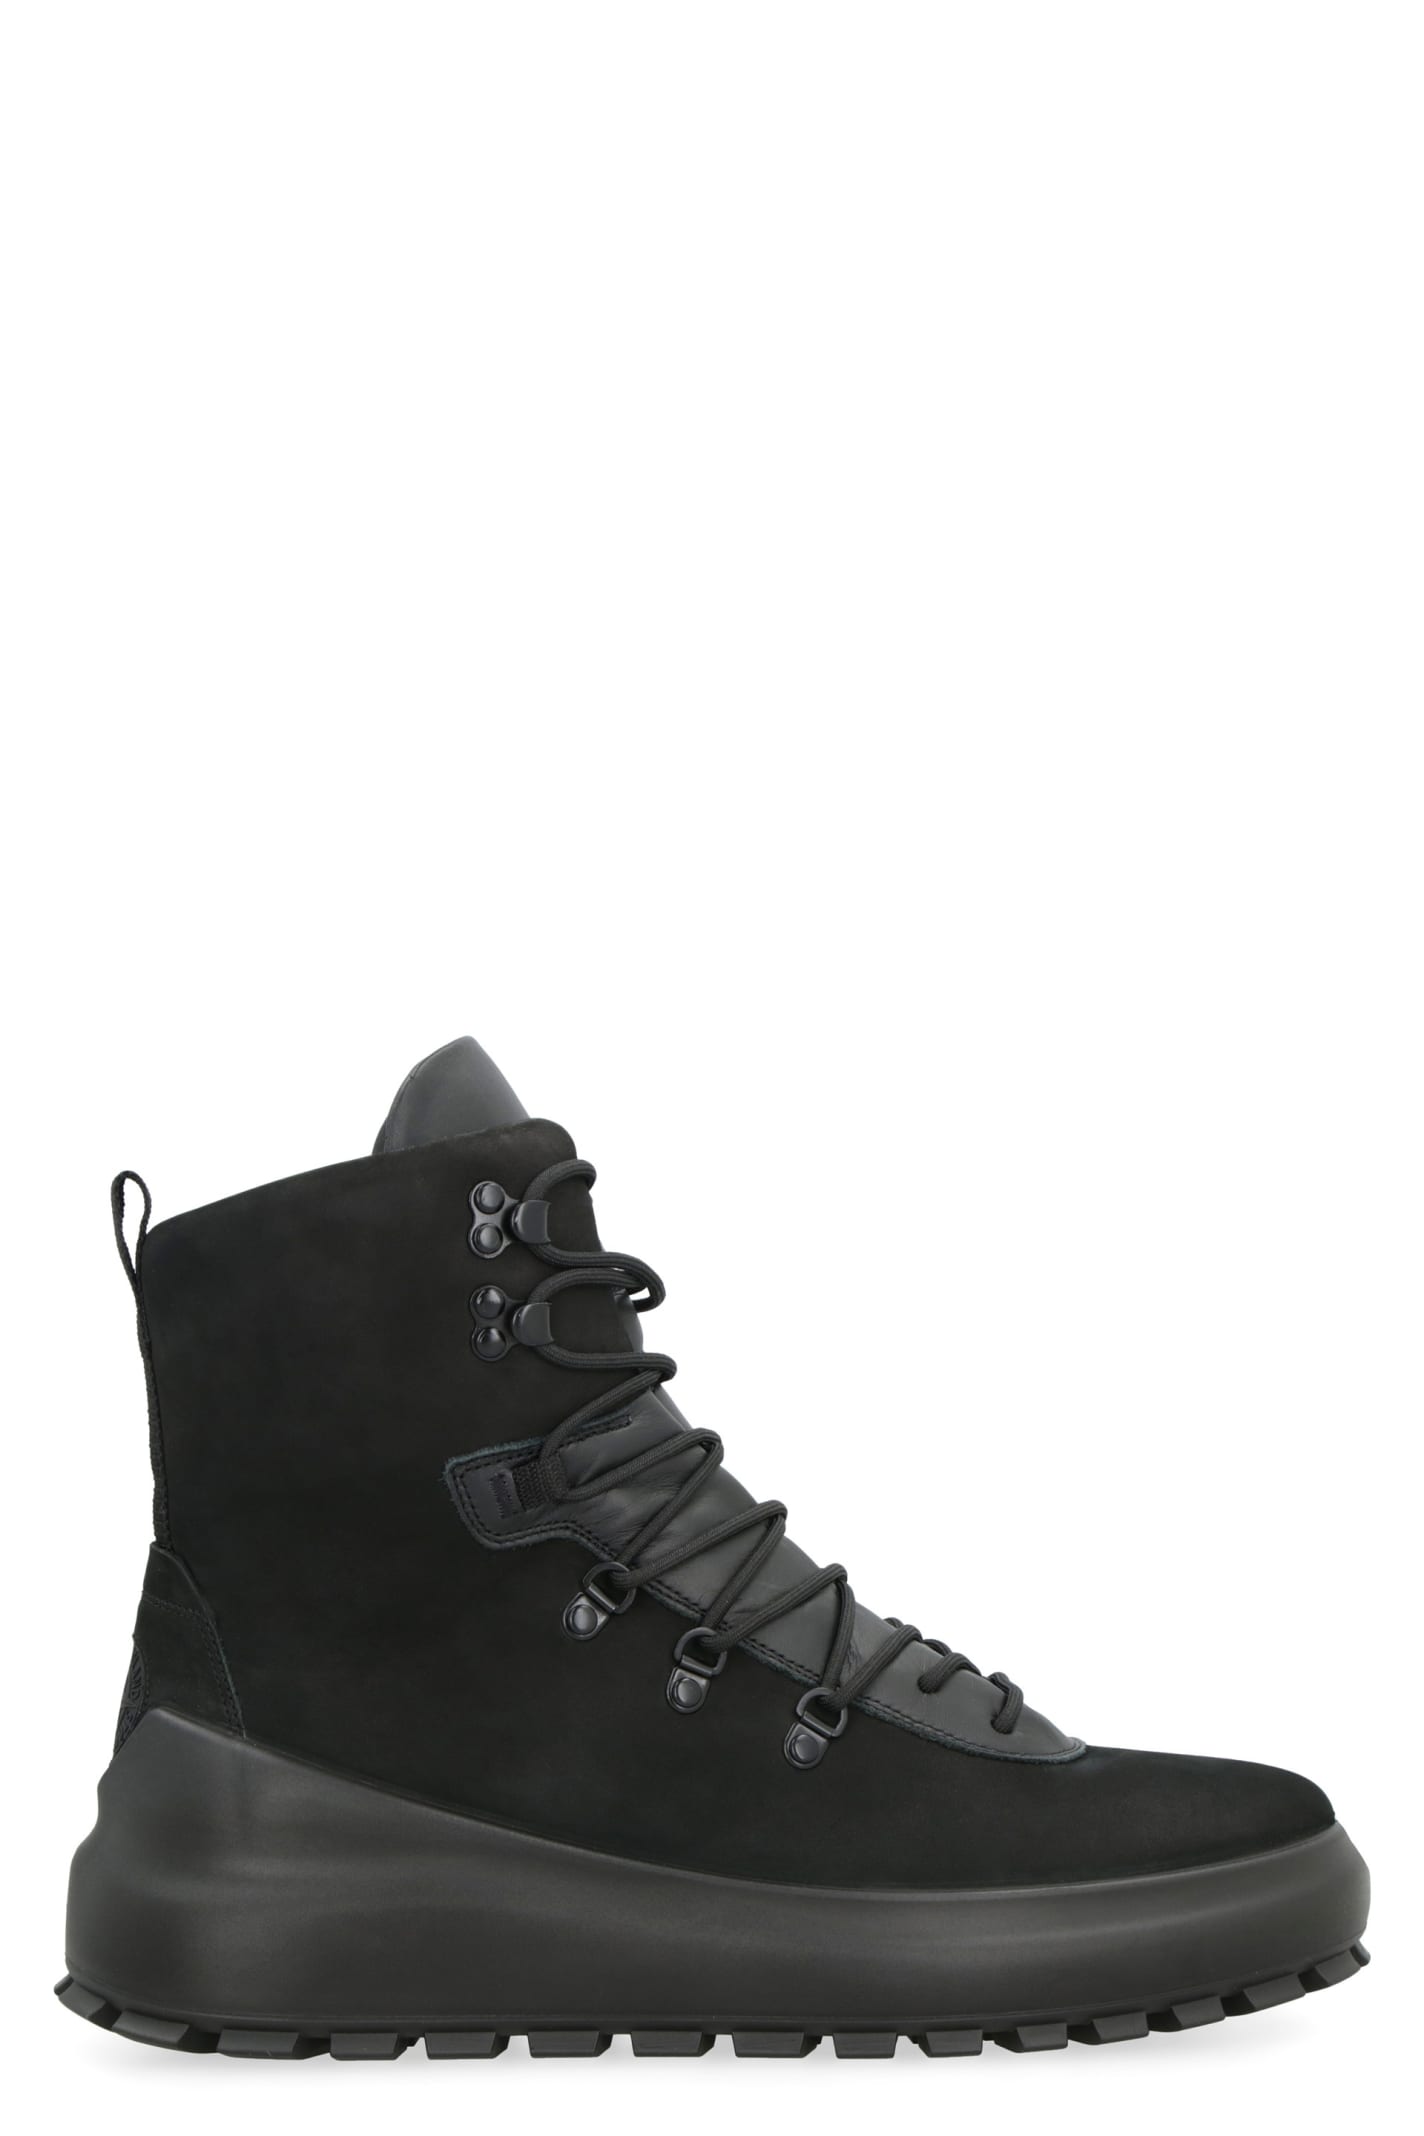 Stone Island Leather Lace-up Boots